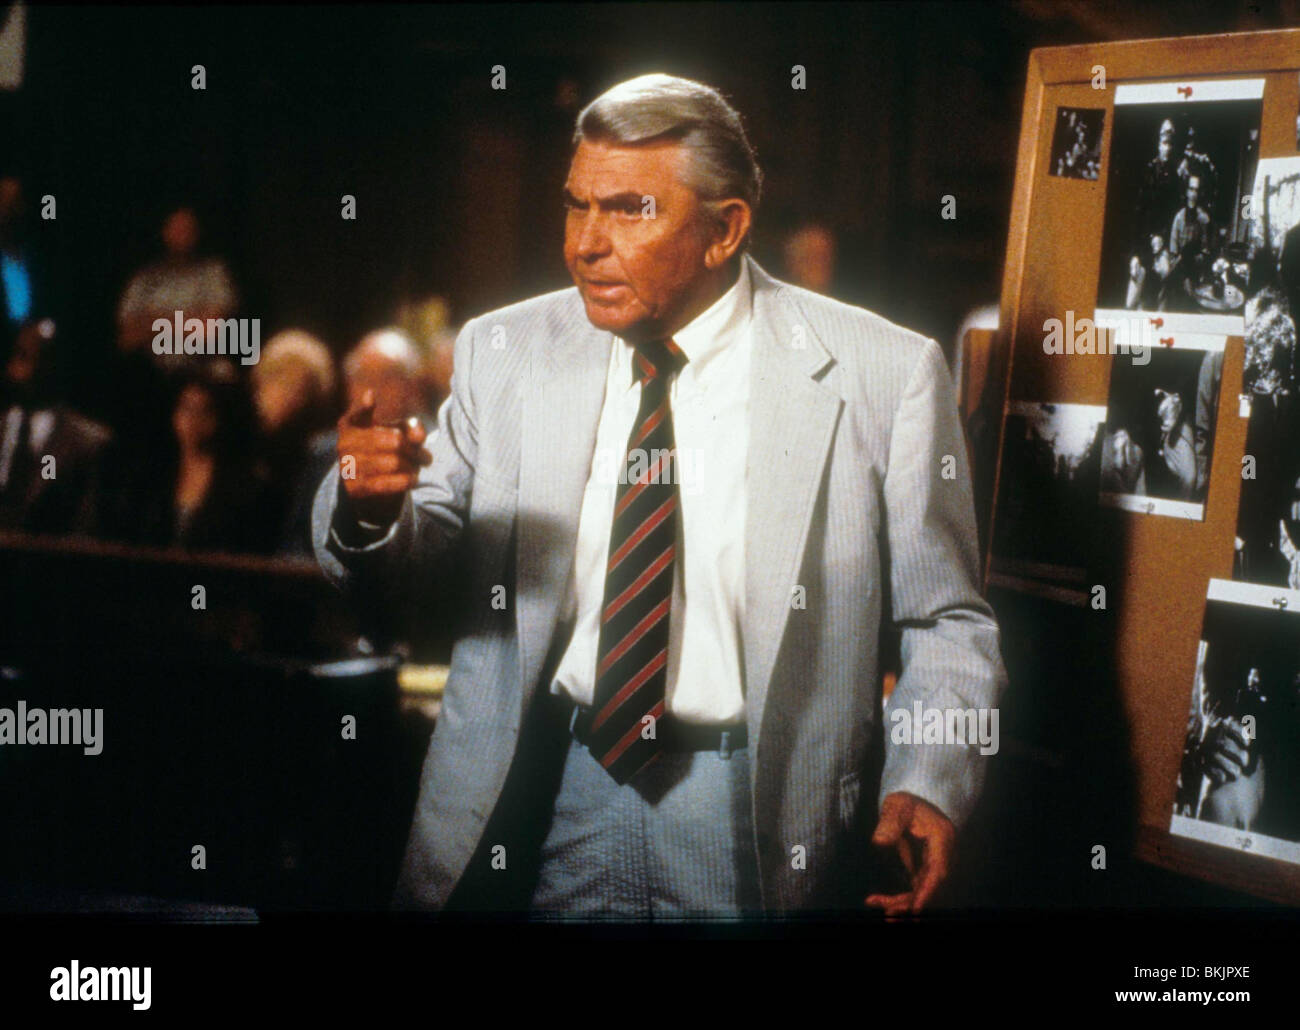 MATLOCK (TV) ANDY GRIFFITH Stock Photo